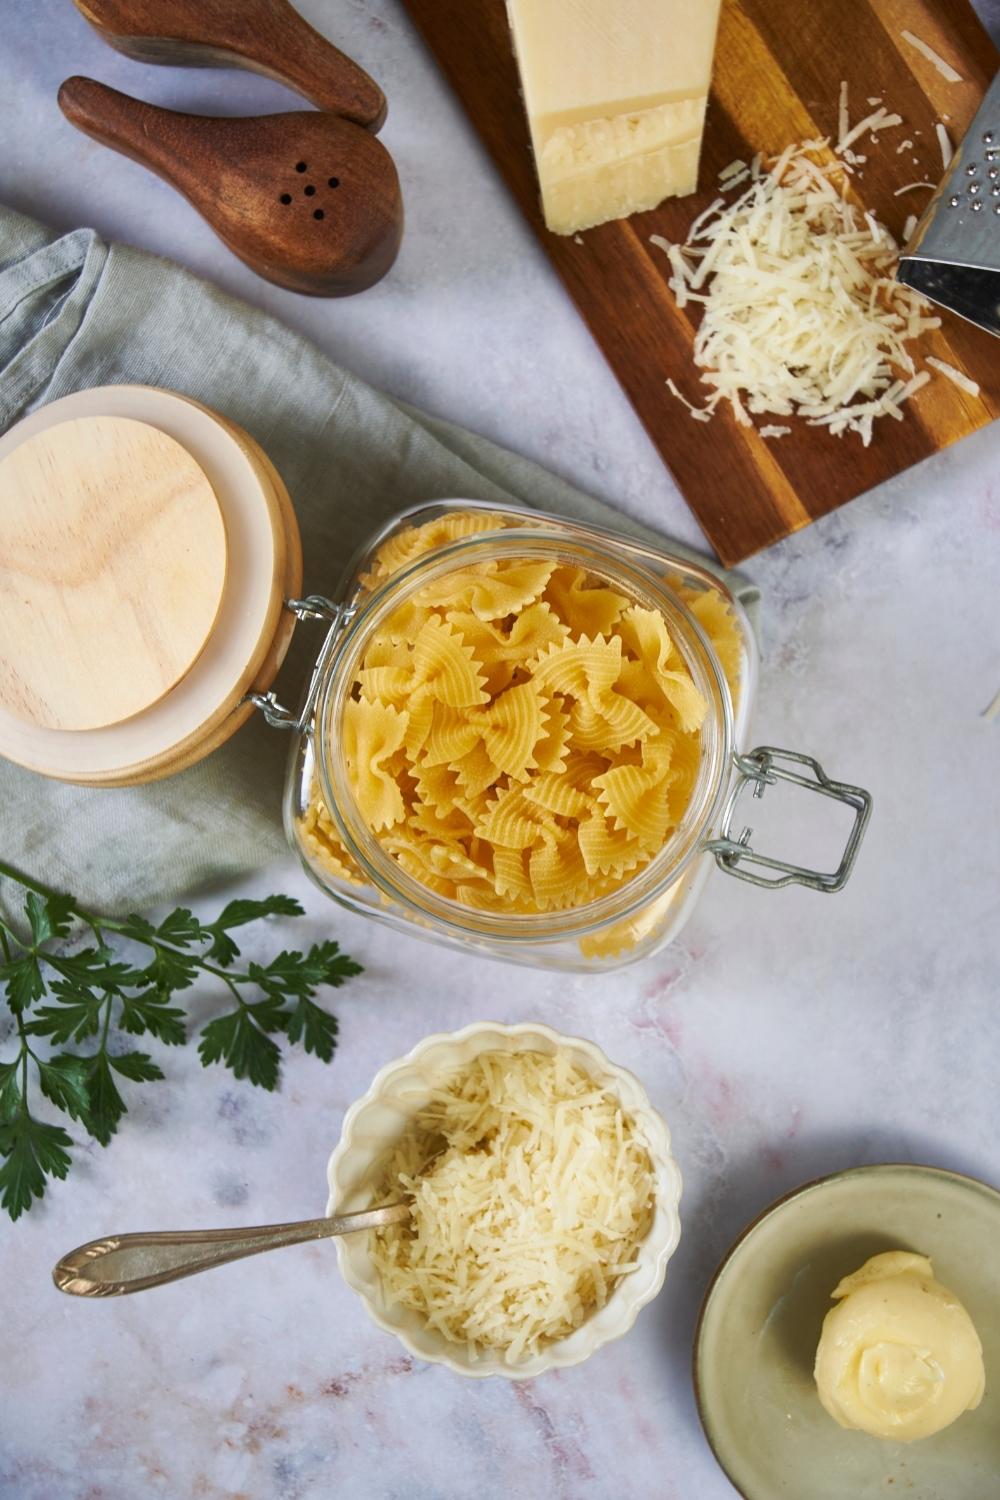 An assortment of ingredients for microwaving pasta including a jar of uncooked pasta, parmesan cheese, butter, and parsley.